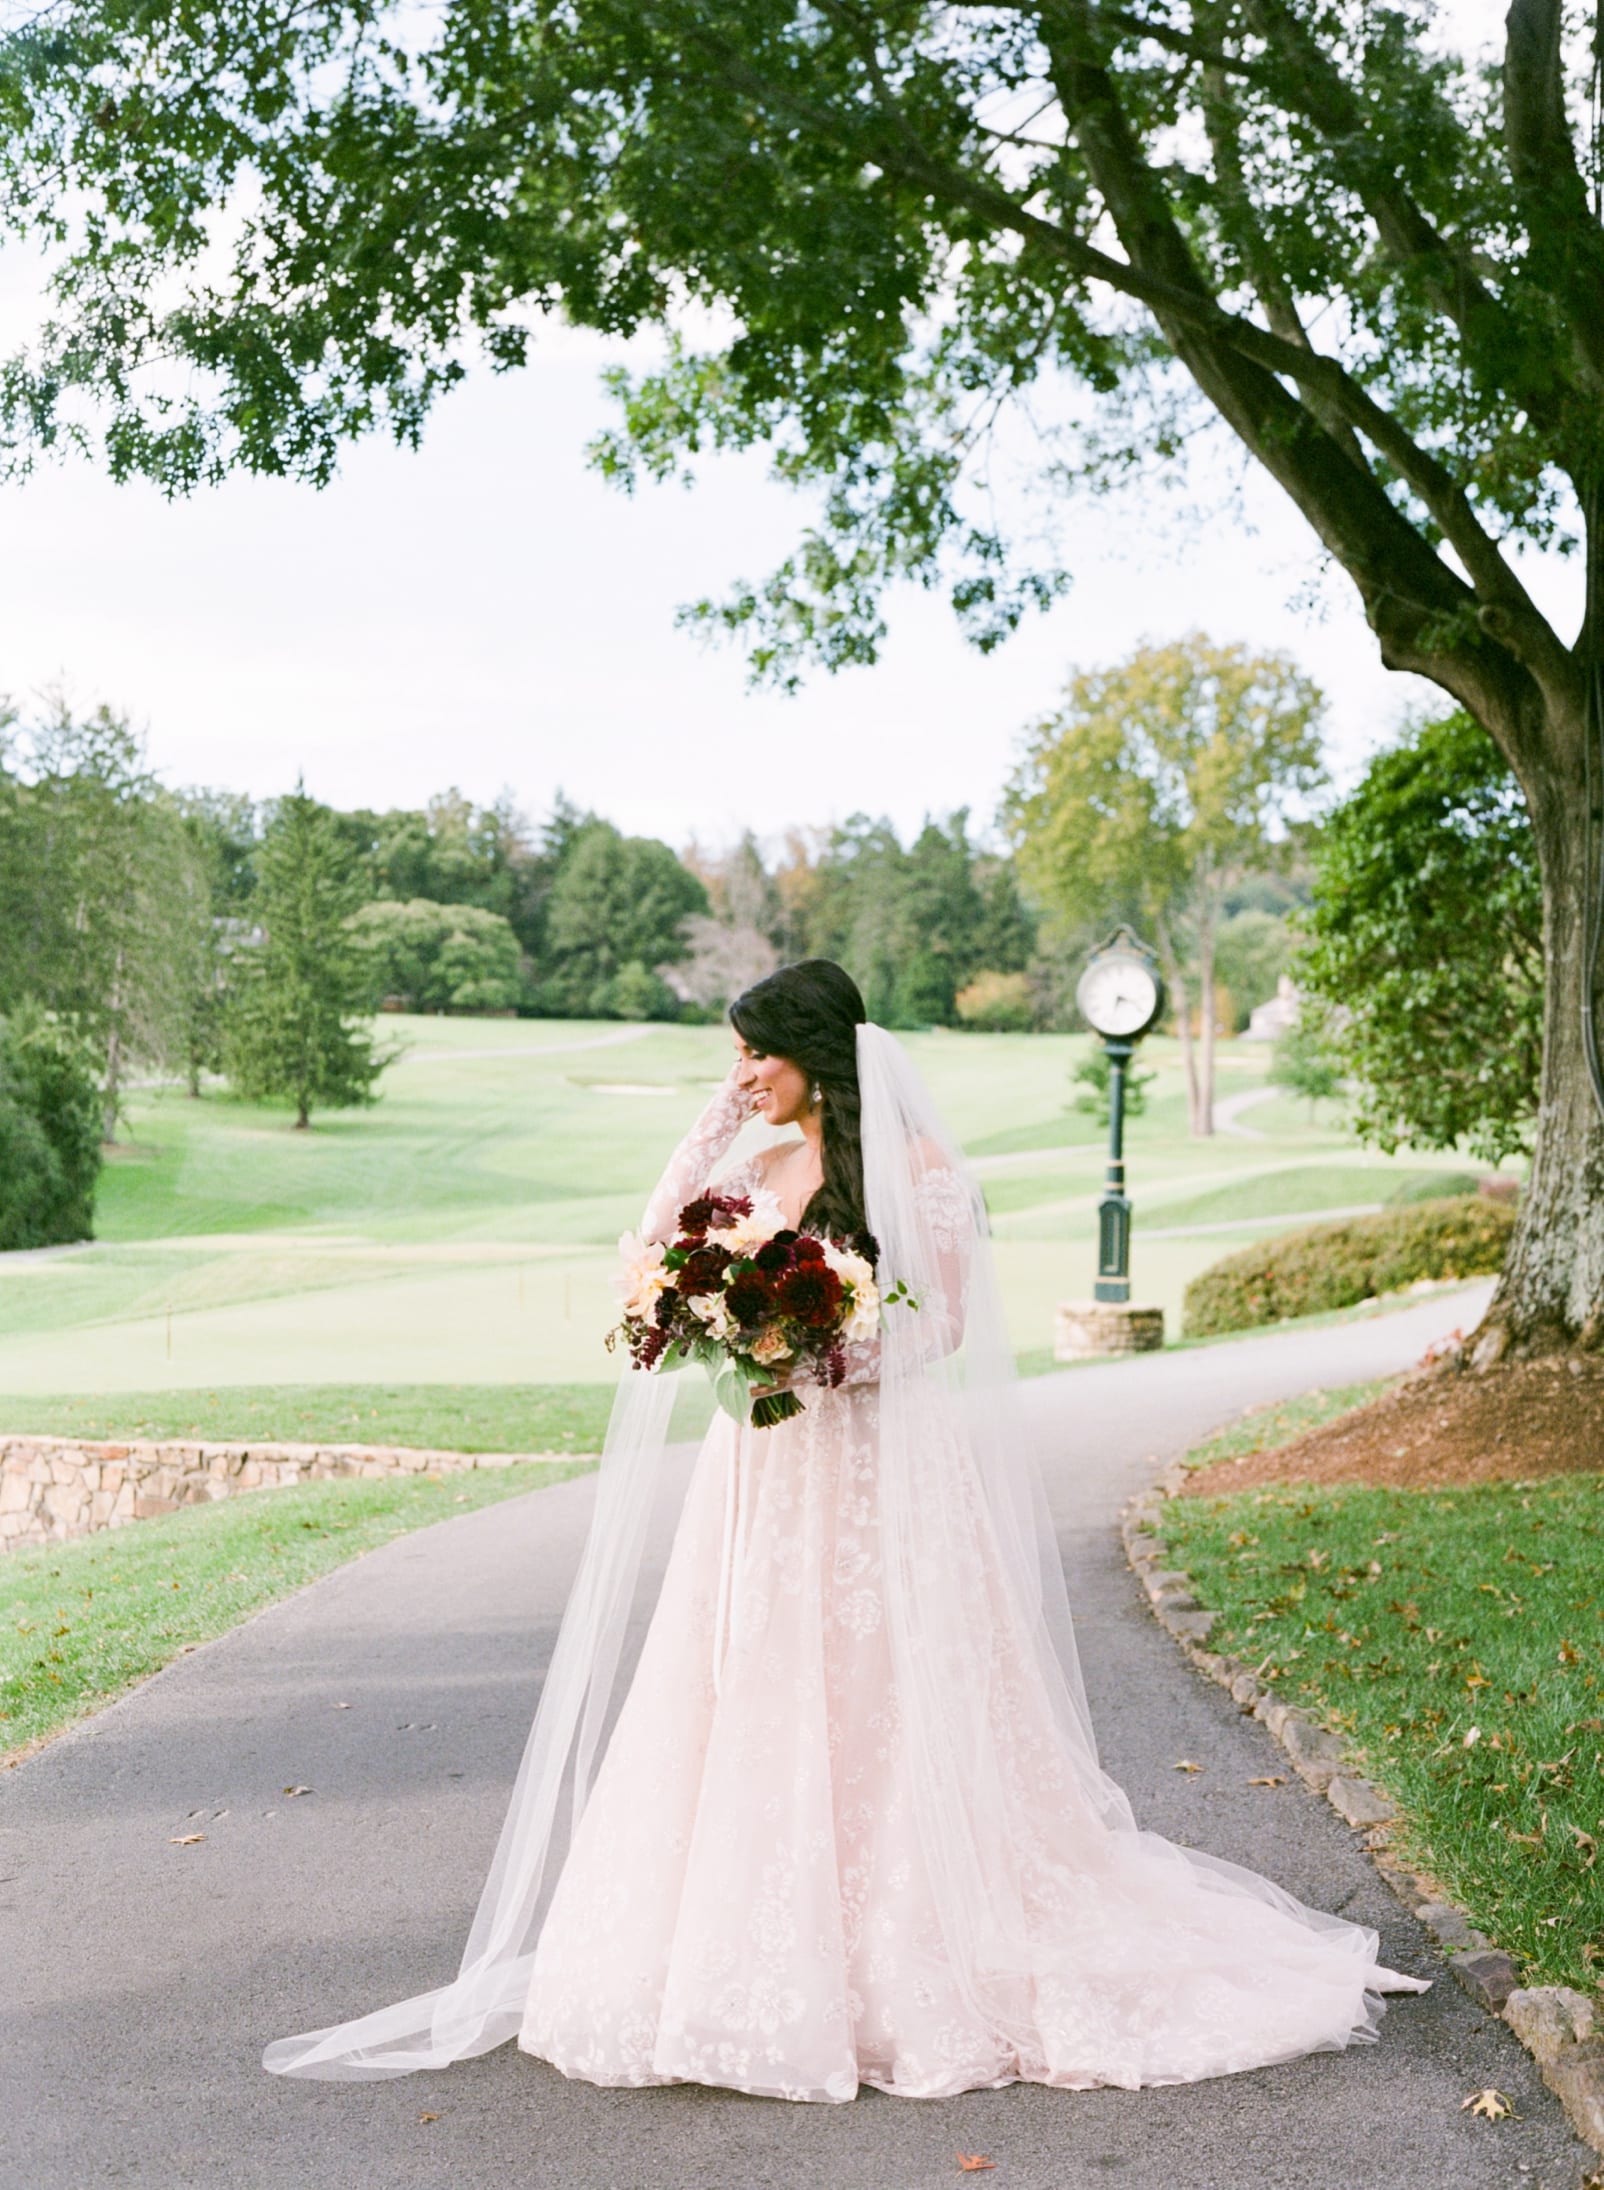 Bridal gown from Hayden Olivia Bridal with long lace sleeves and a long veil bridal portrait on a golf course photo